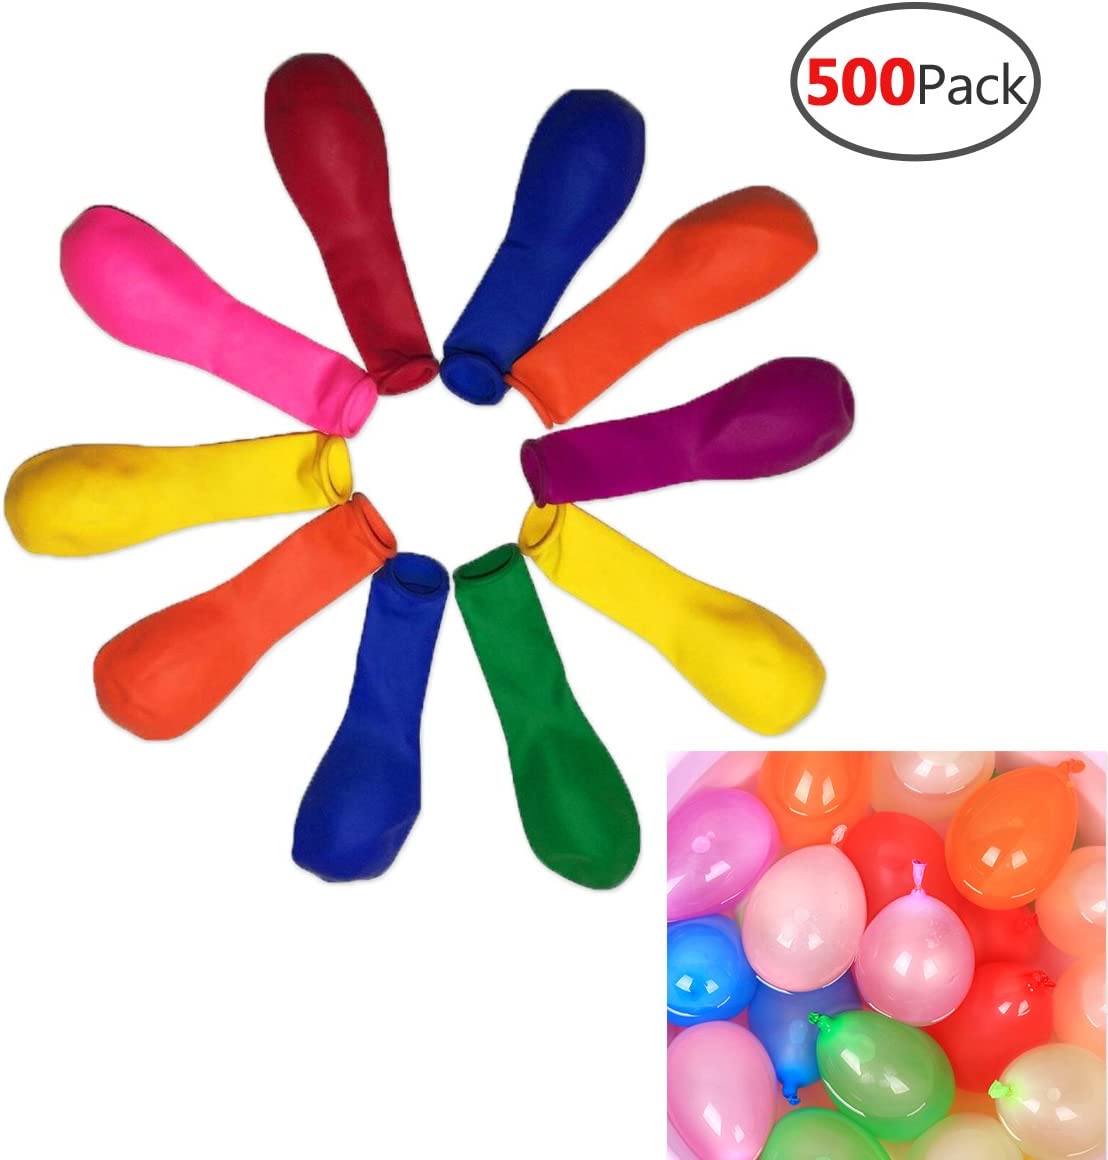 Zodight 1000 Water Balloons Water Bombs Self Seal for Summer Party Toy Beach No Need To Tie